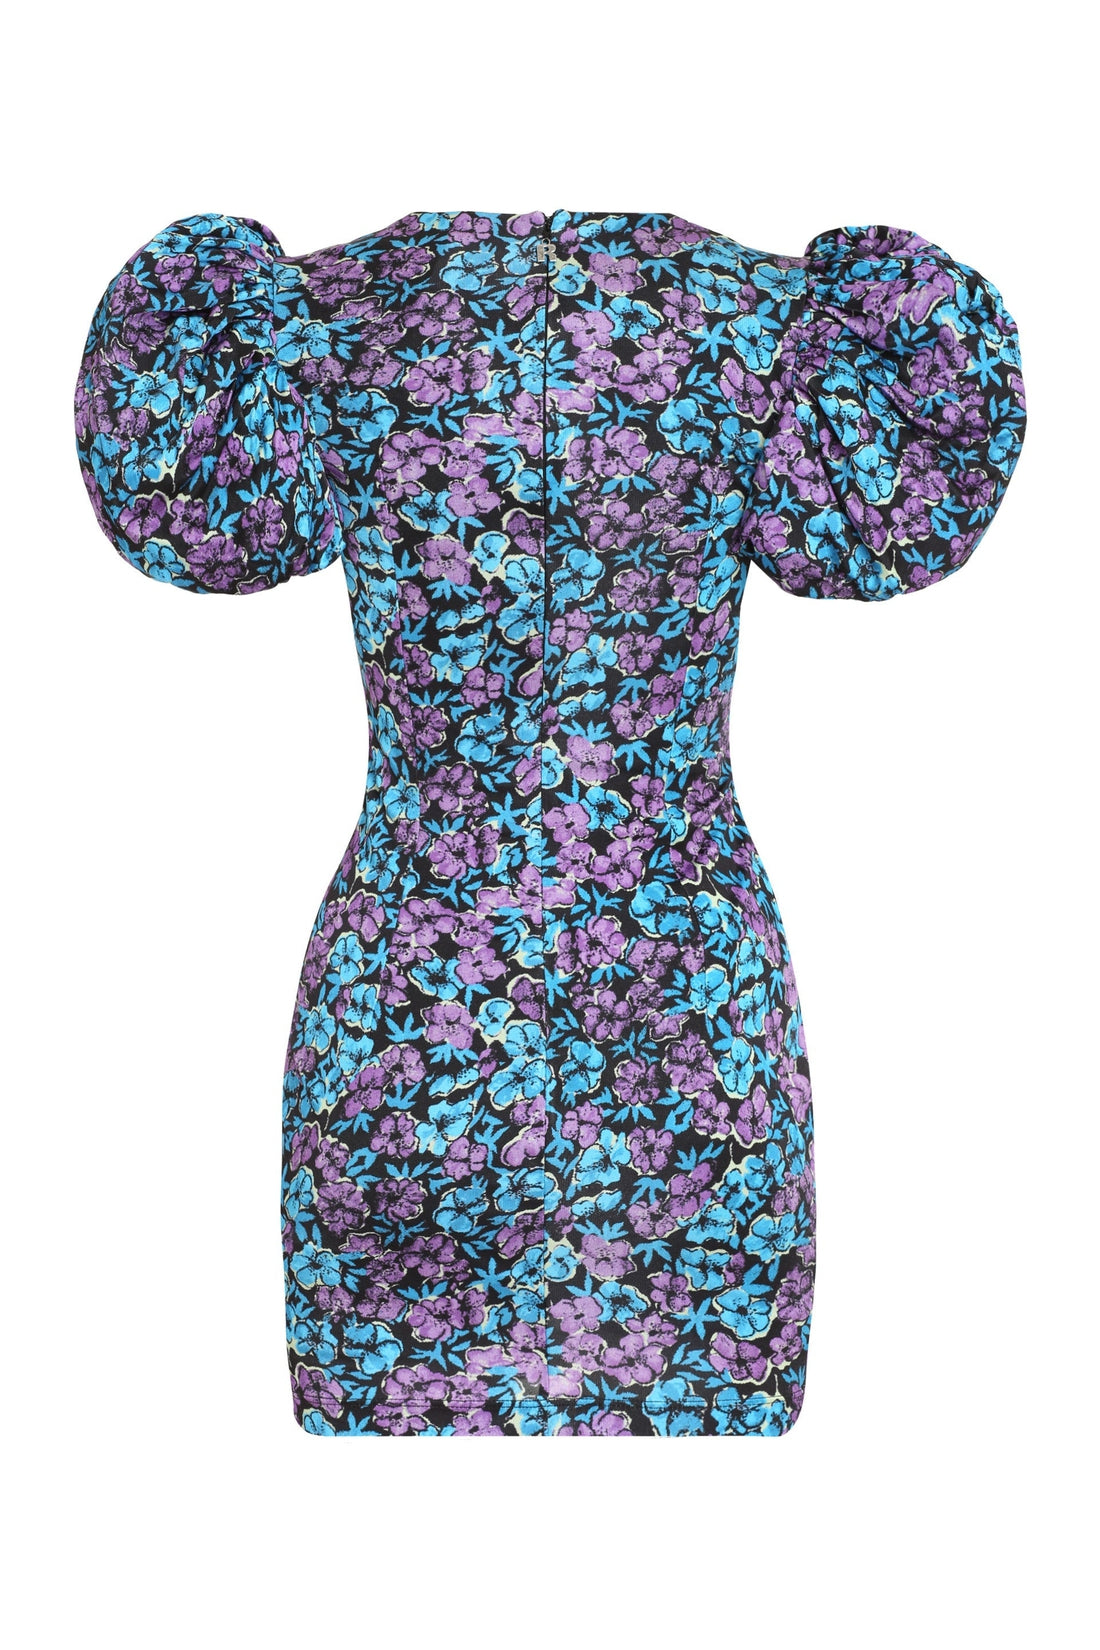 Piralo-OUTLET-SALE-Rudy dress with floral print-ARCHIVIST